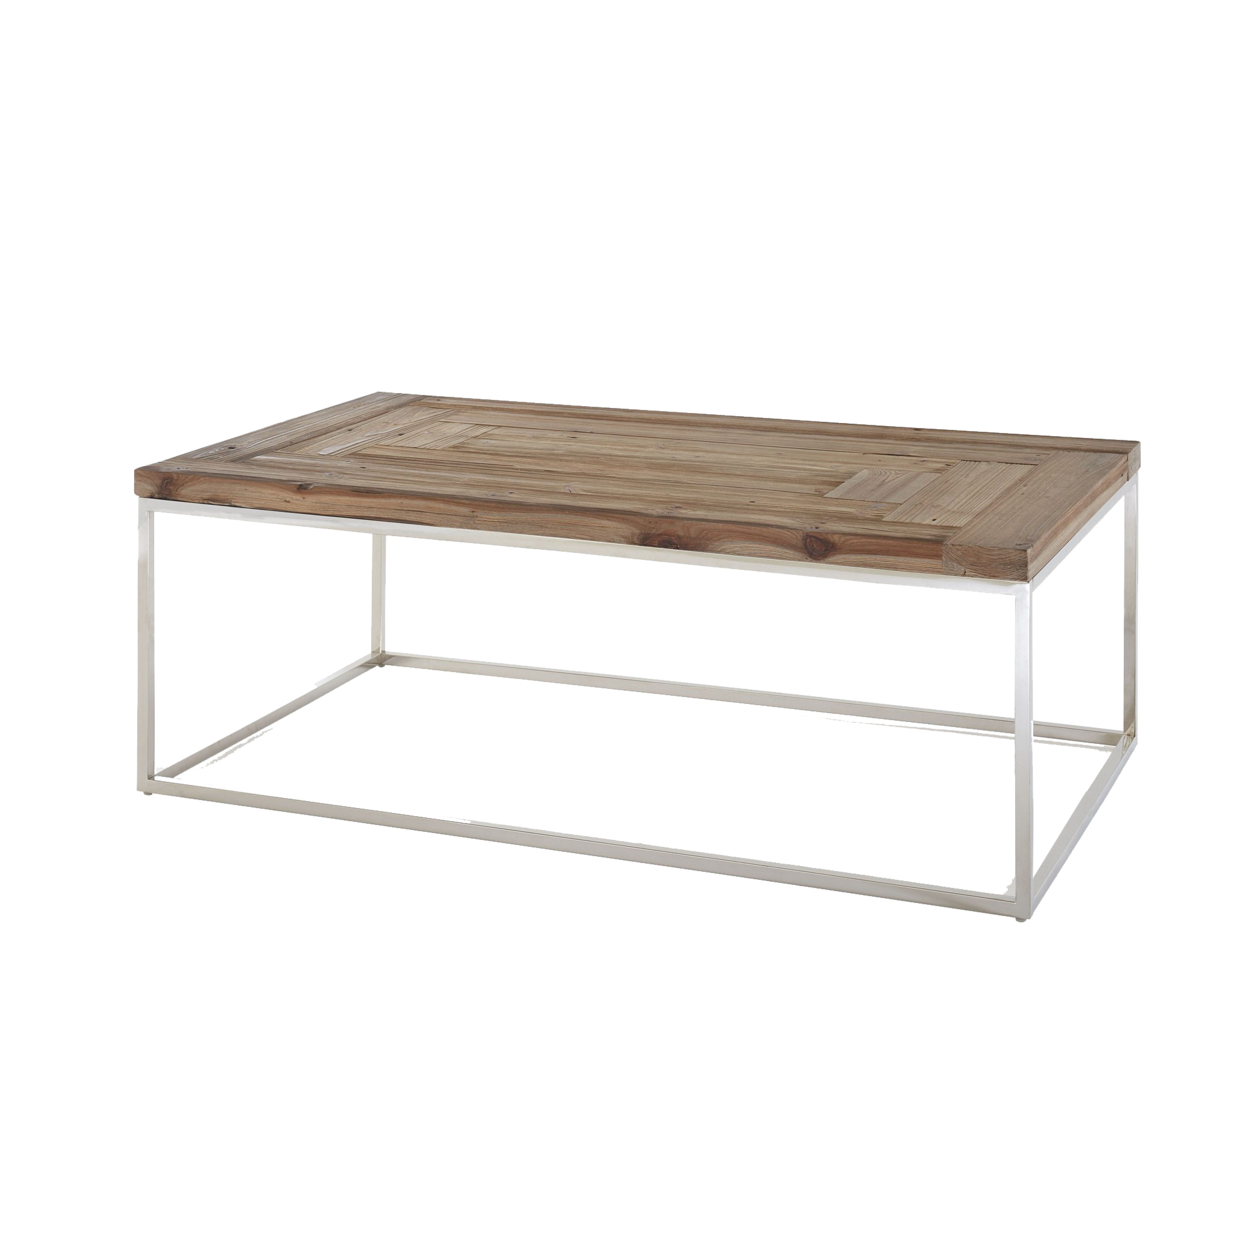 50 Inches Wooden Top Coffee Table With Metal Base, Brown And Silver- Saltoro Sherpi